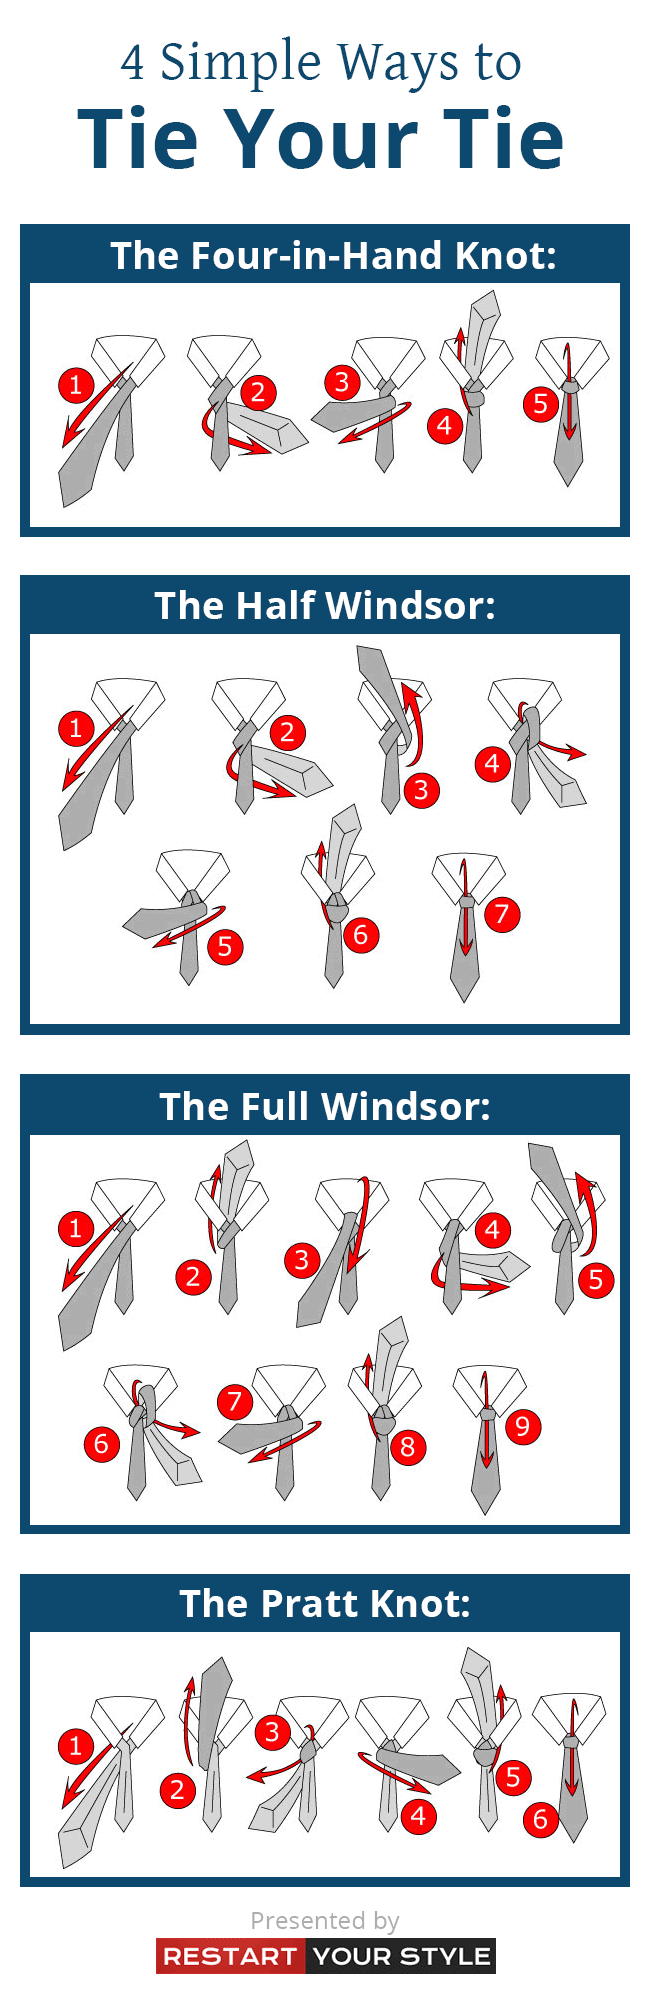 How to tie a tie infographic